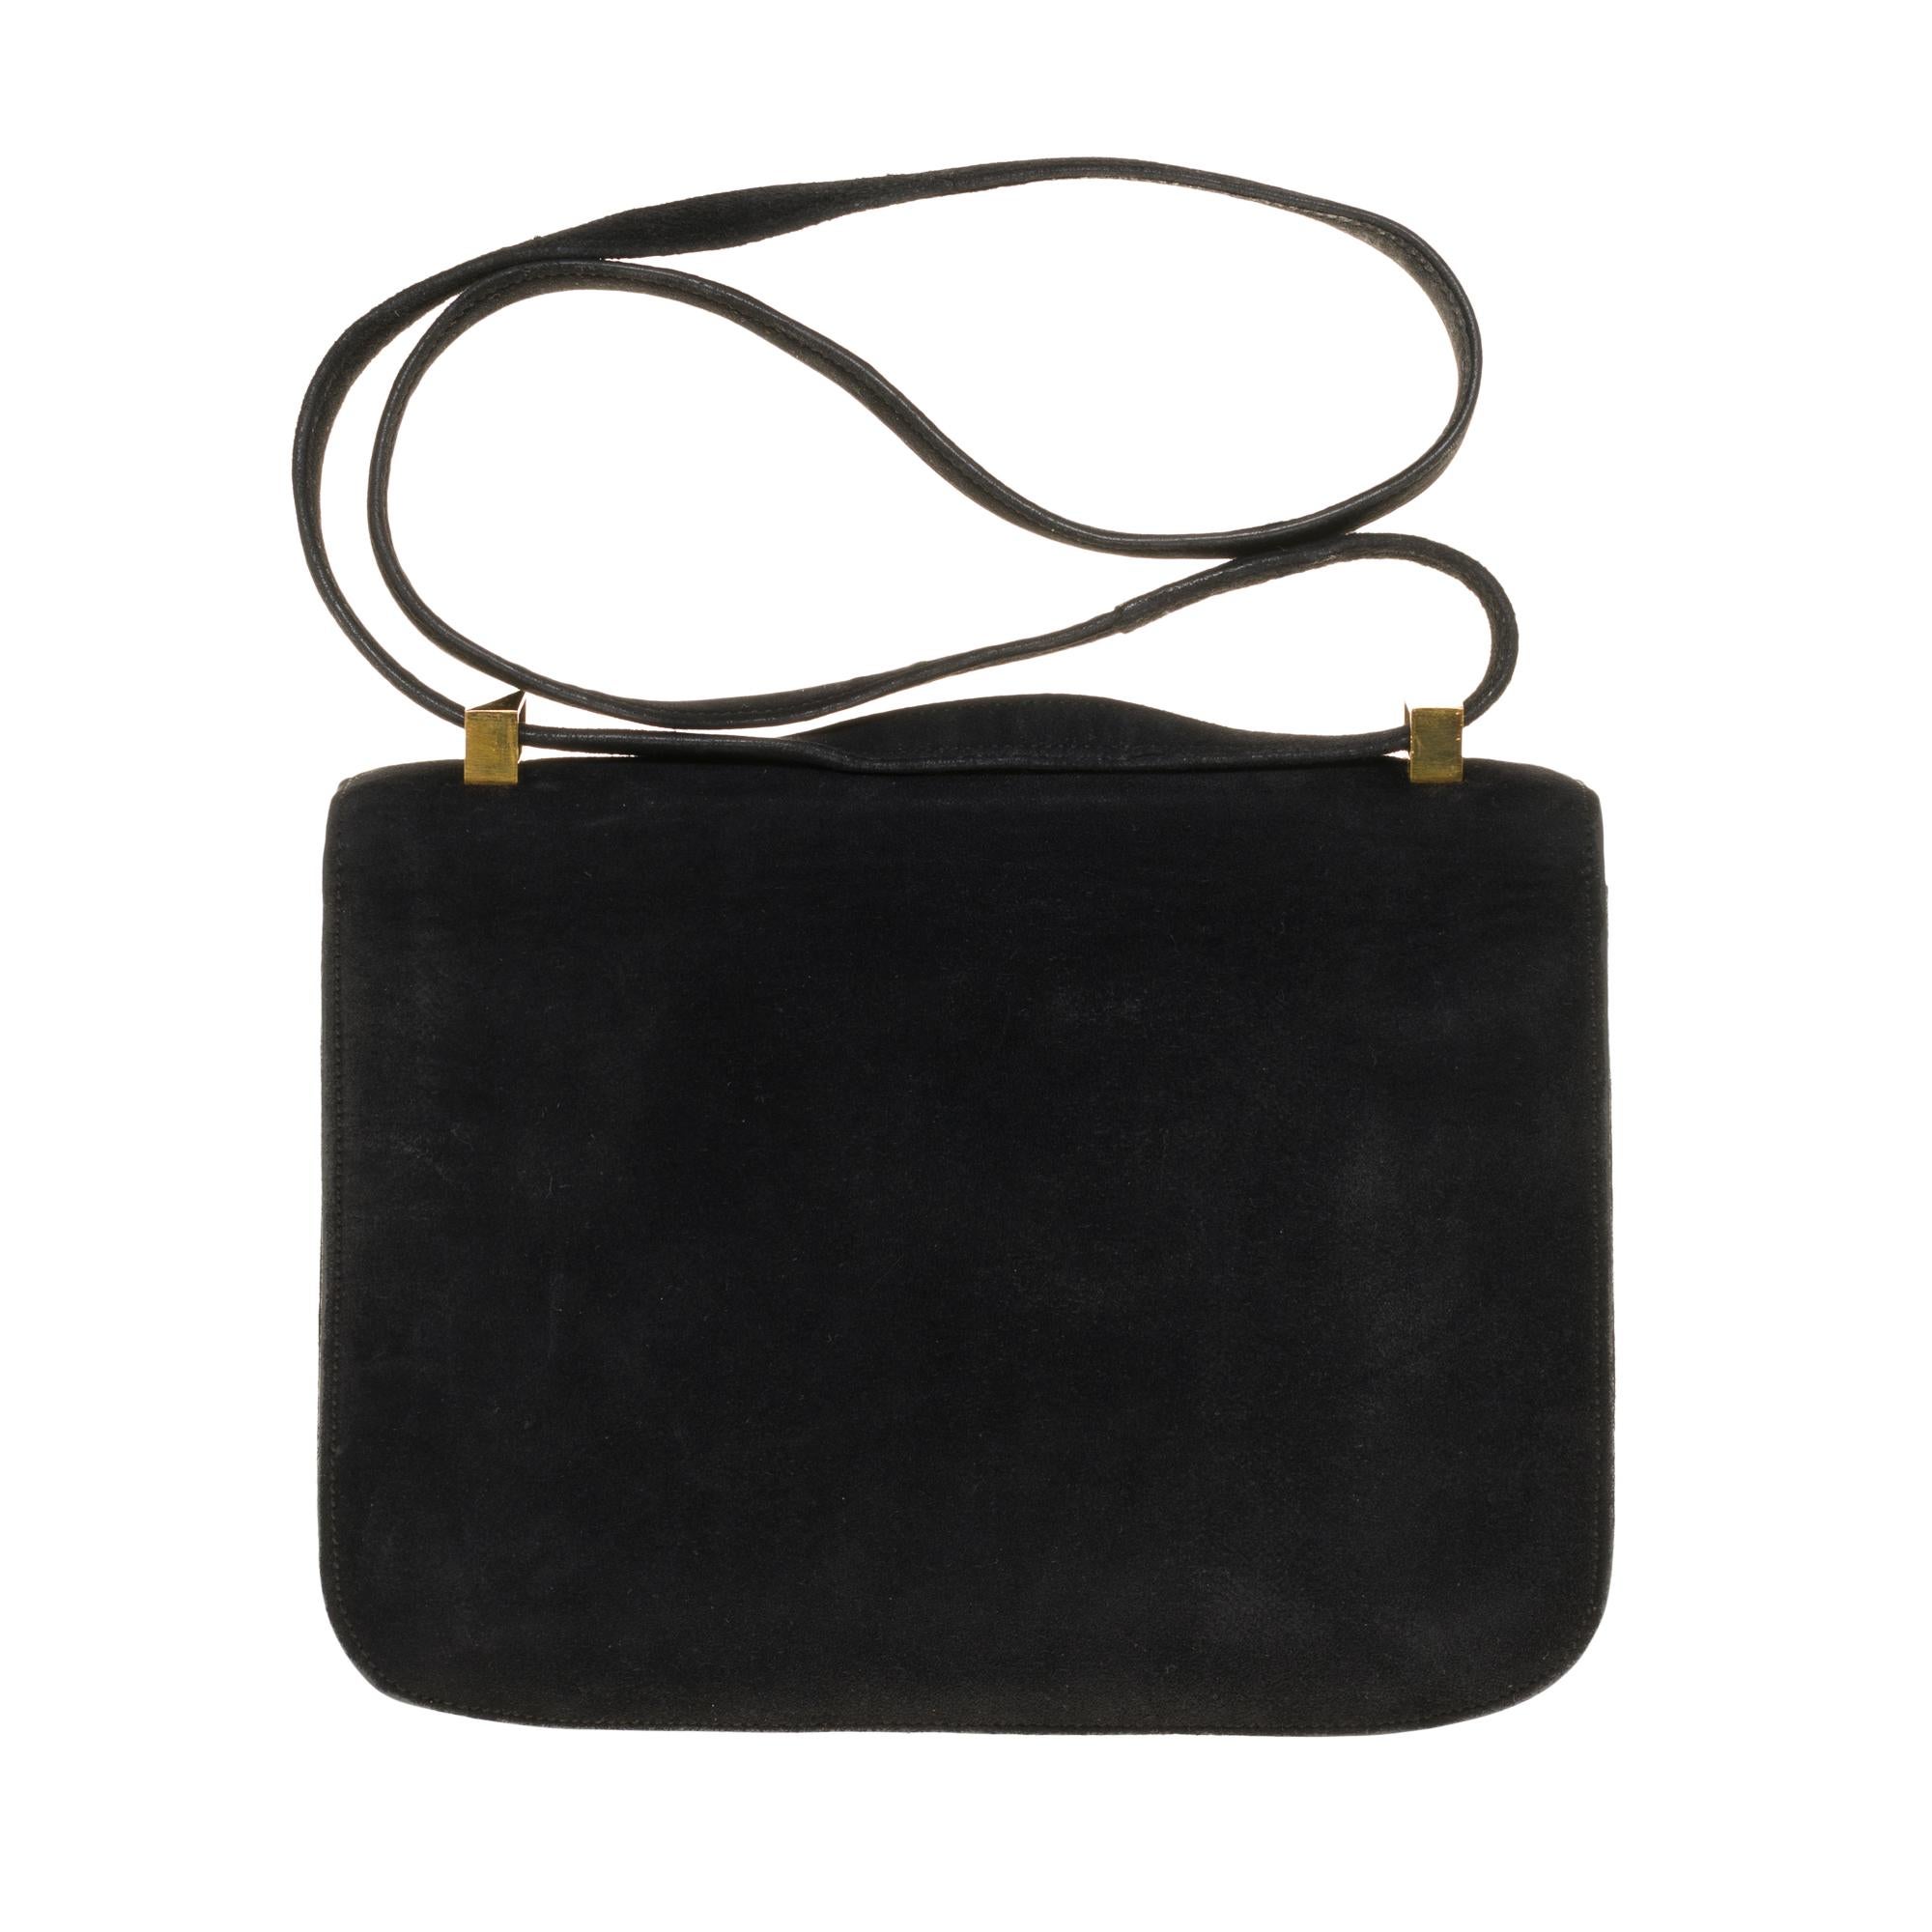 VERY RARE Hermes Constance 23 shoulder bag in black suede and gold ...